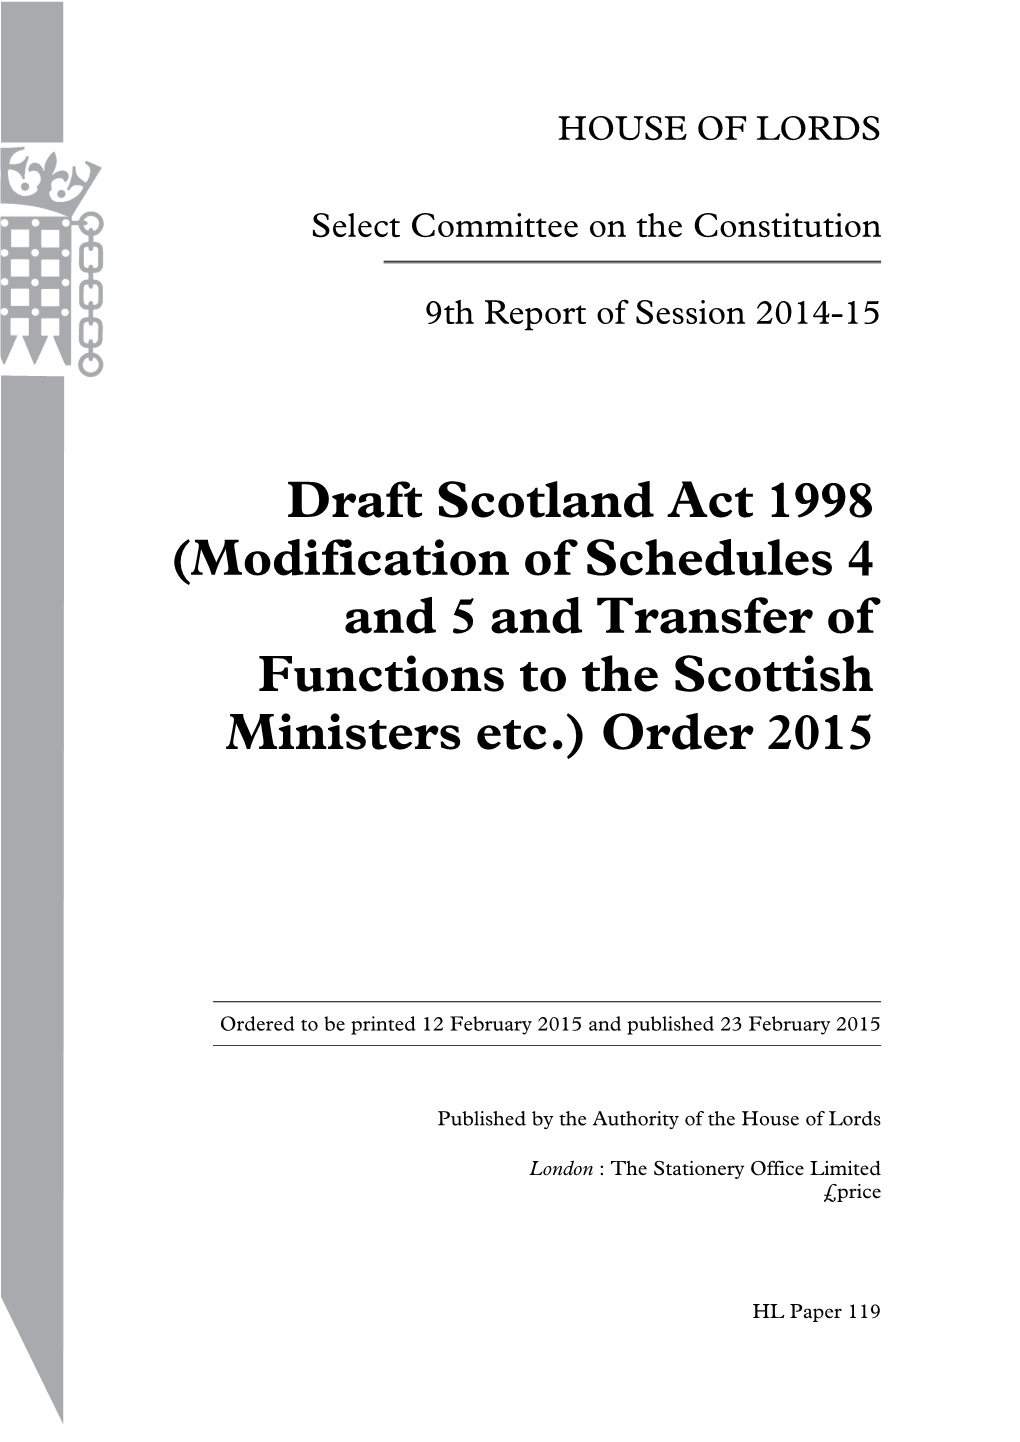 Draft Scotland Act 1998 (Modification of Schedules 4 and 5 and Transfer of Functions to the Scottish Ministers Etc.) Order 2015